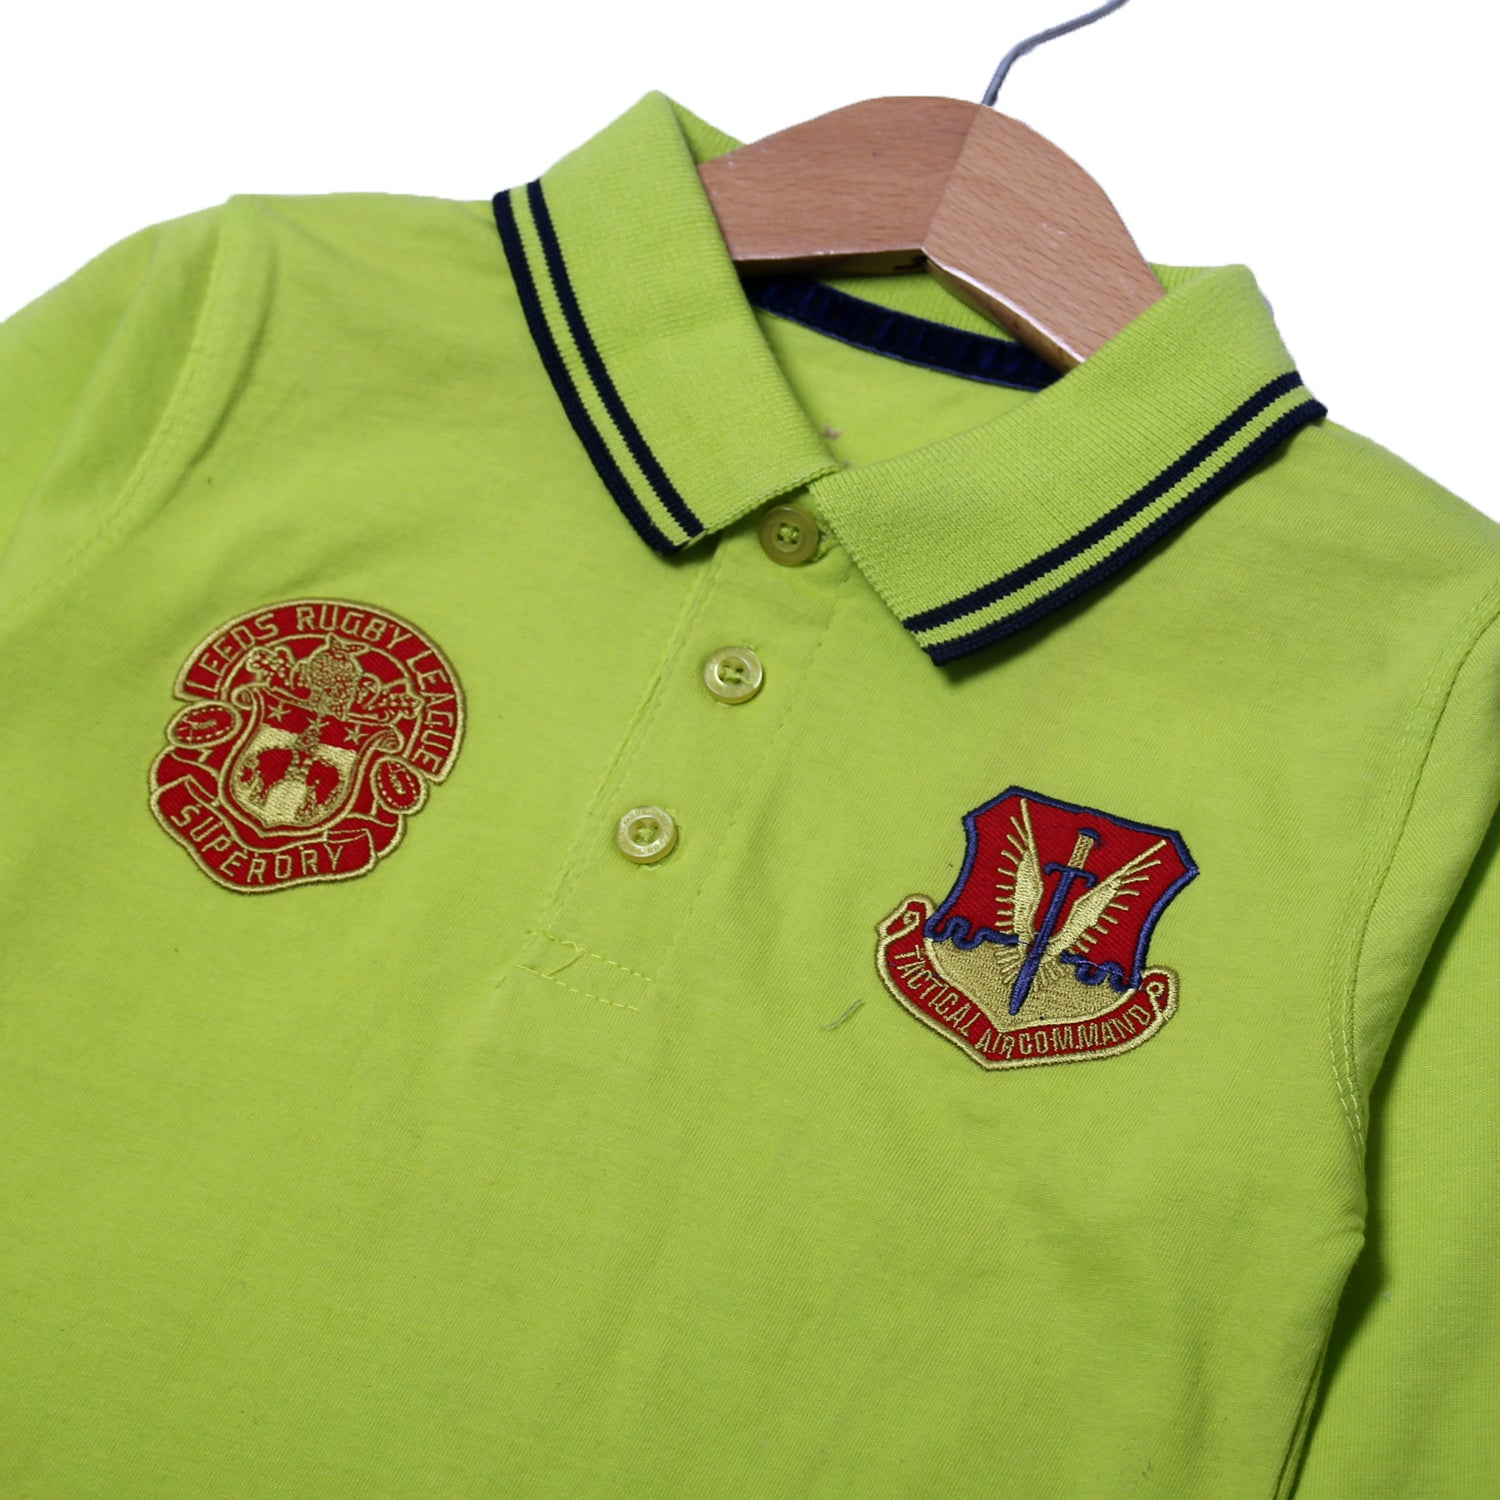 NEW GREEN POLO RUGBY LEAGUE PRINTED FULL SLEEVES T-SHIRT